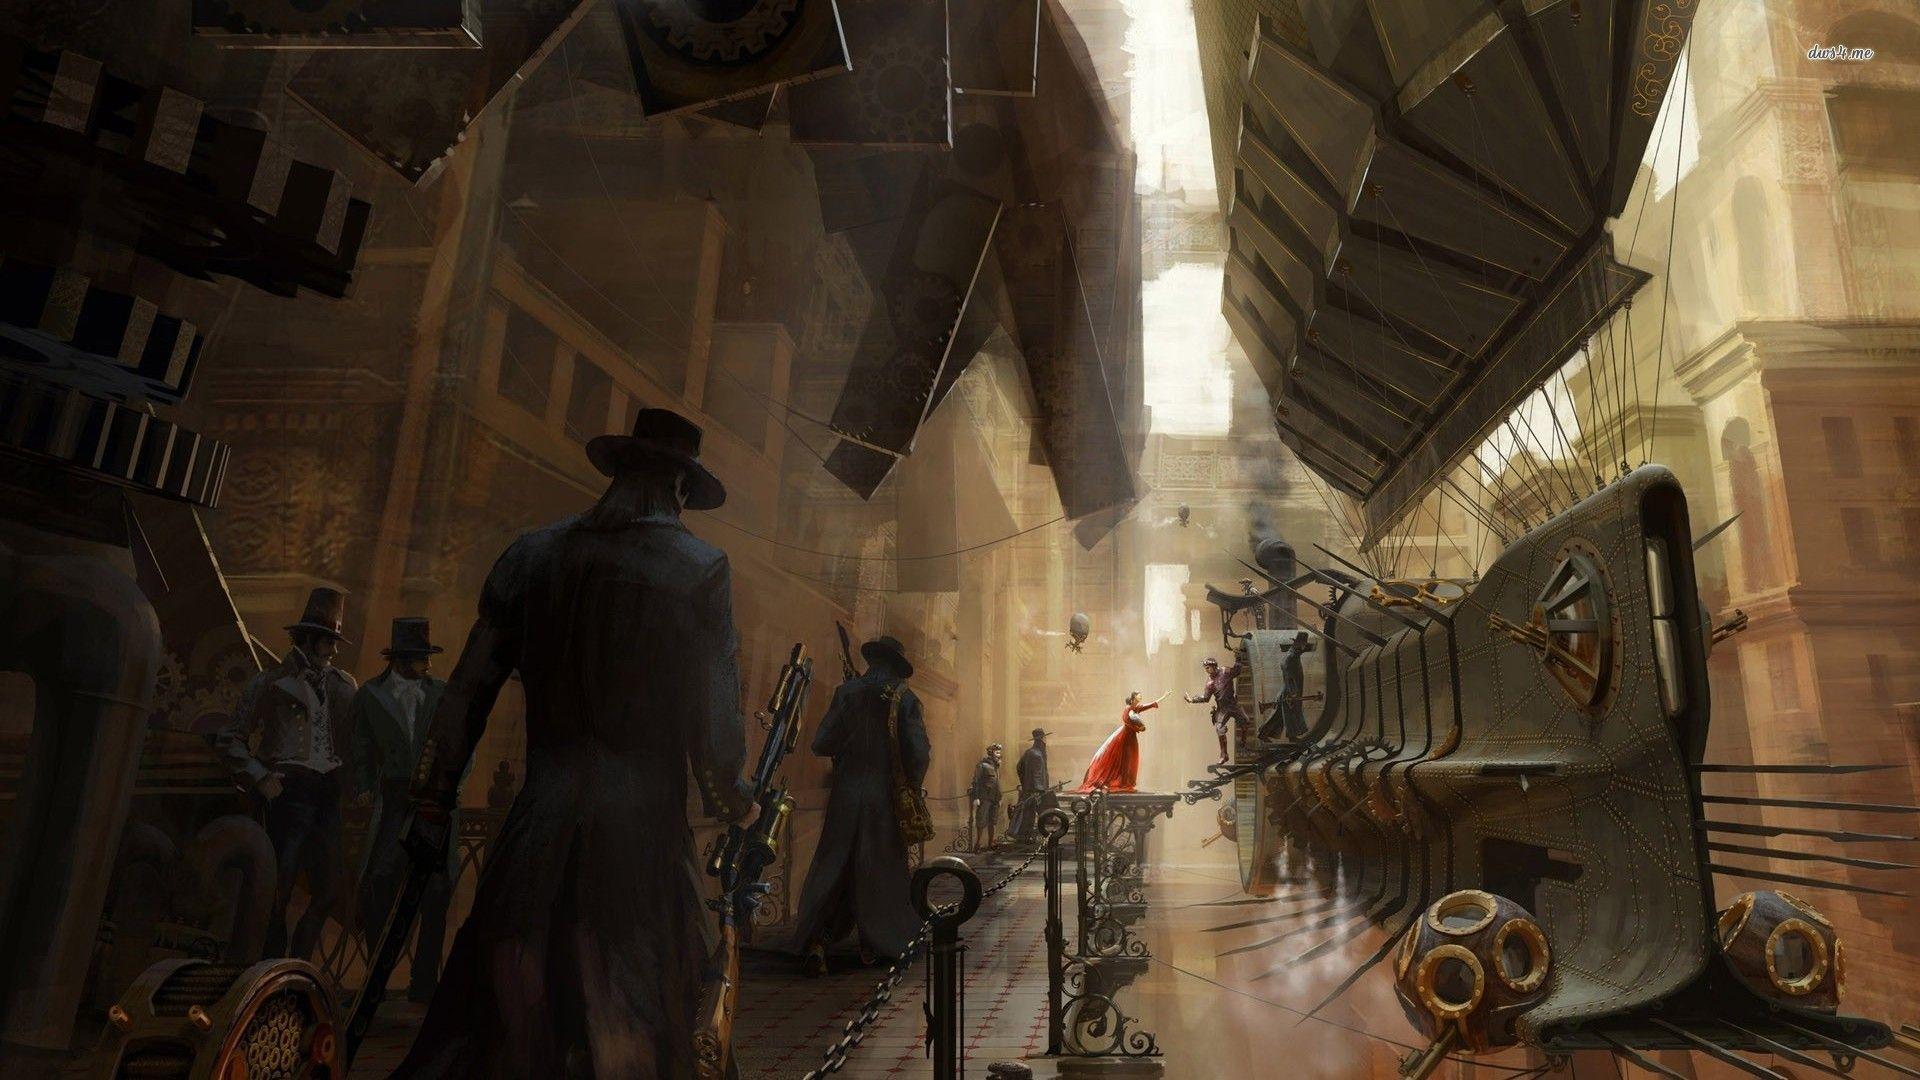 Steampunk City Wallpaper Hd Images amp Pictures   Becuo